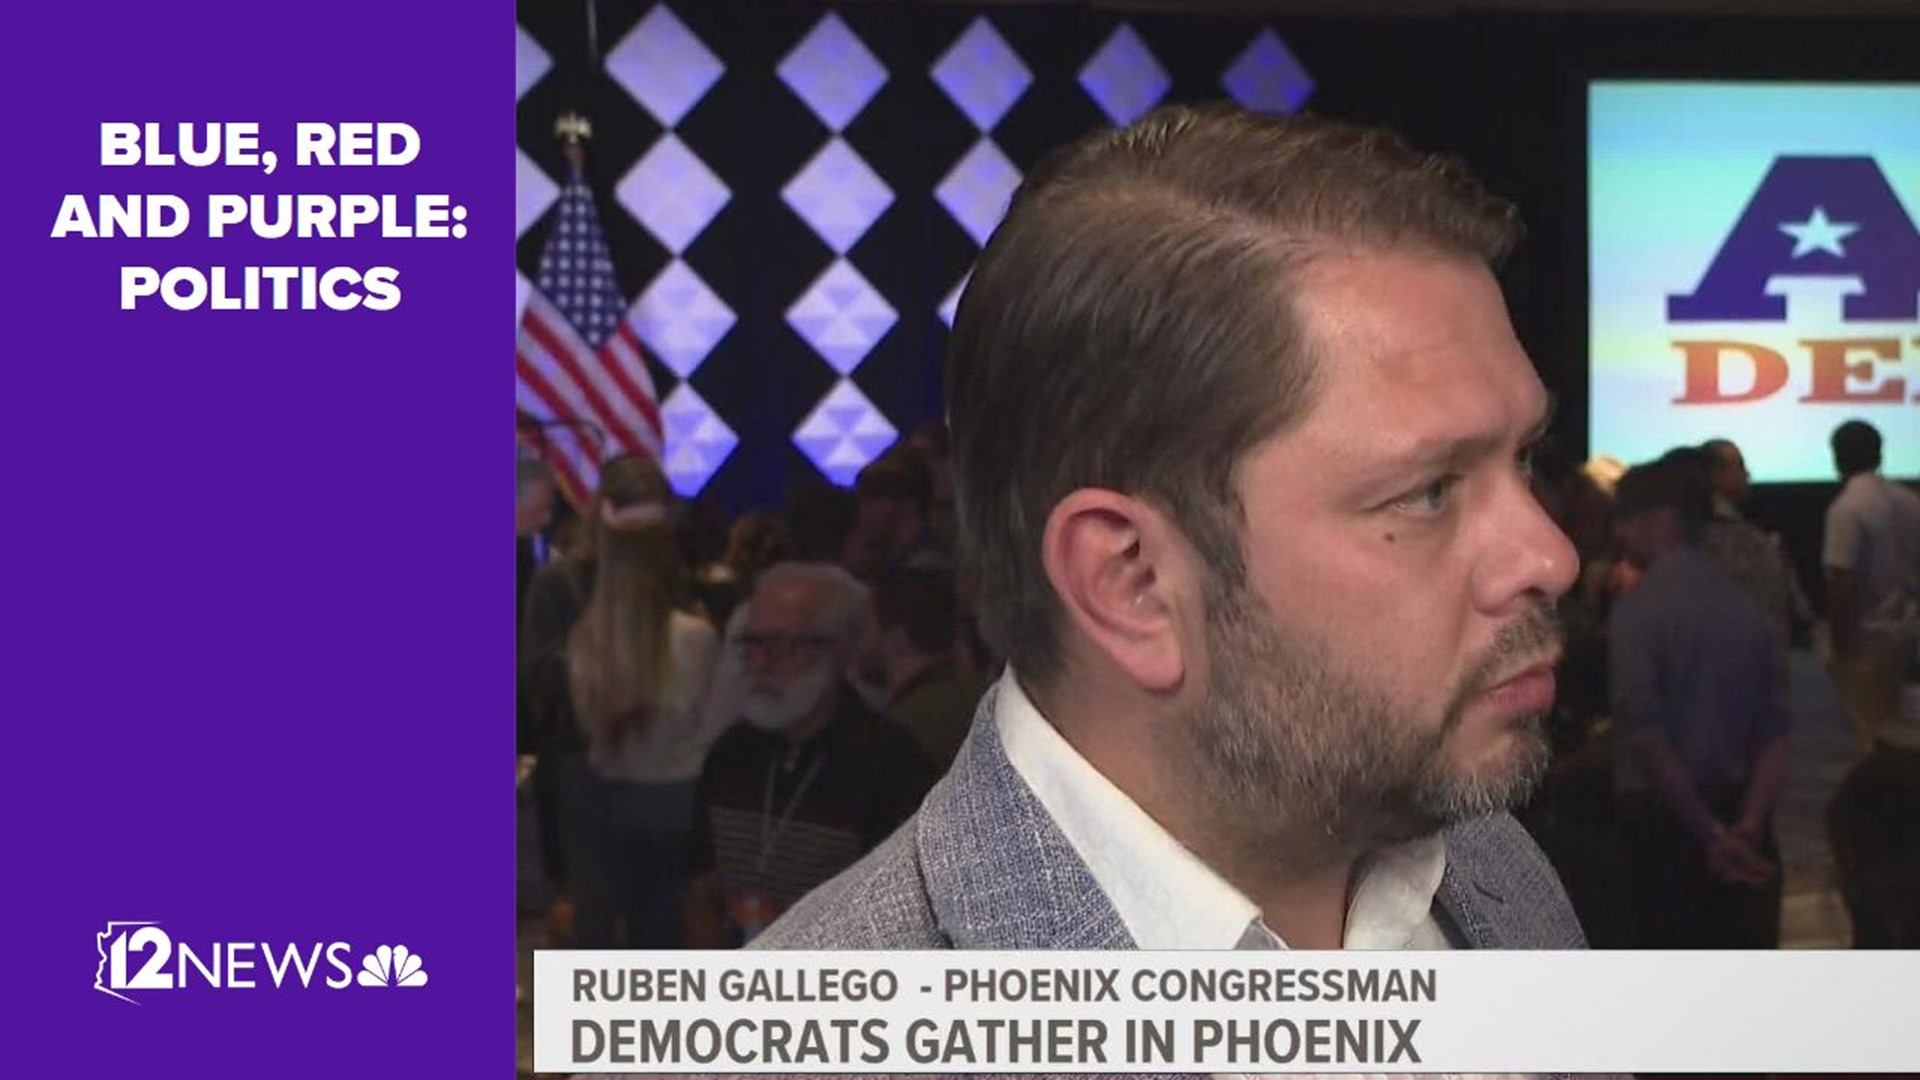 12 News speaks with U.S. Representative Ruben Gallego who says he believes the Democratic party did their part to tell voters what was at stake.